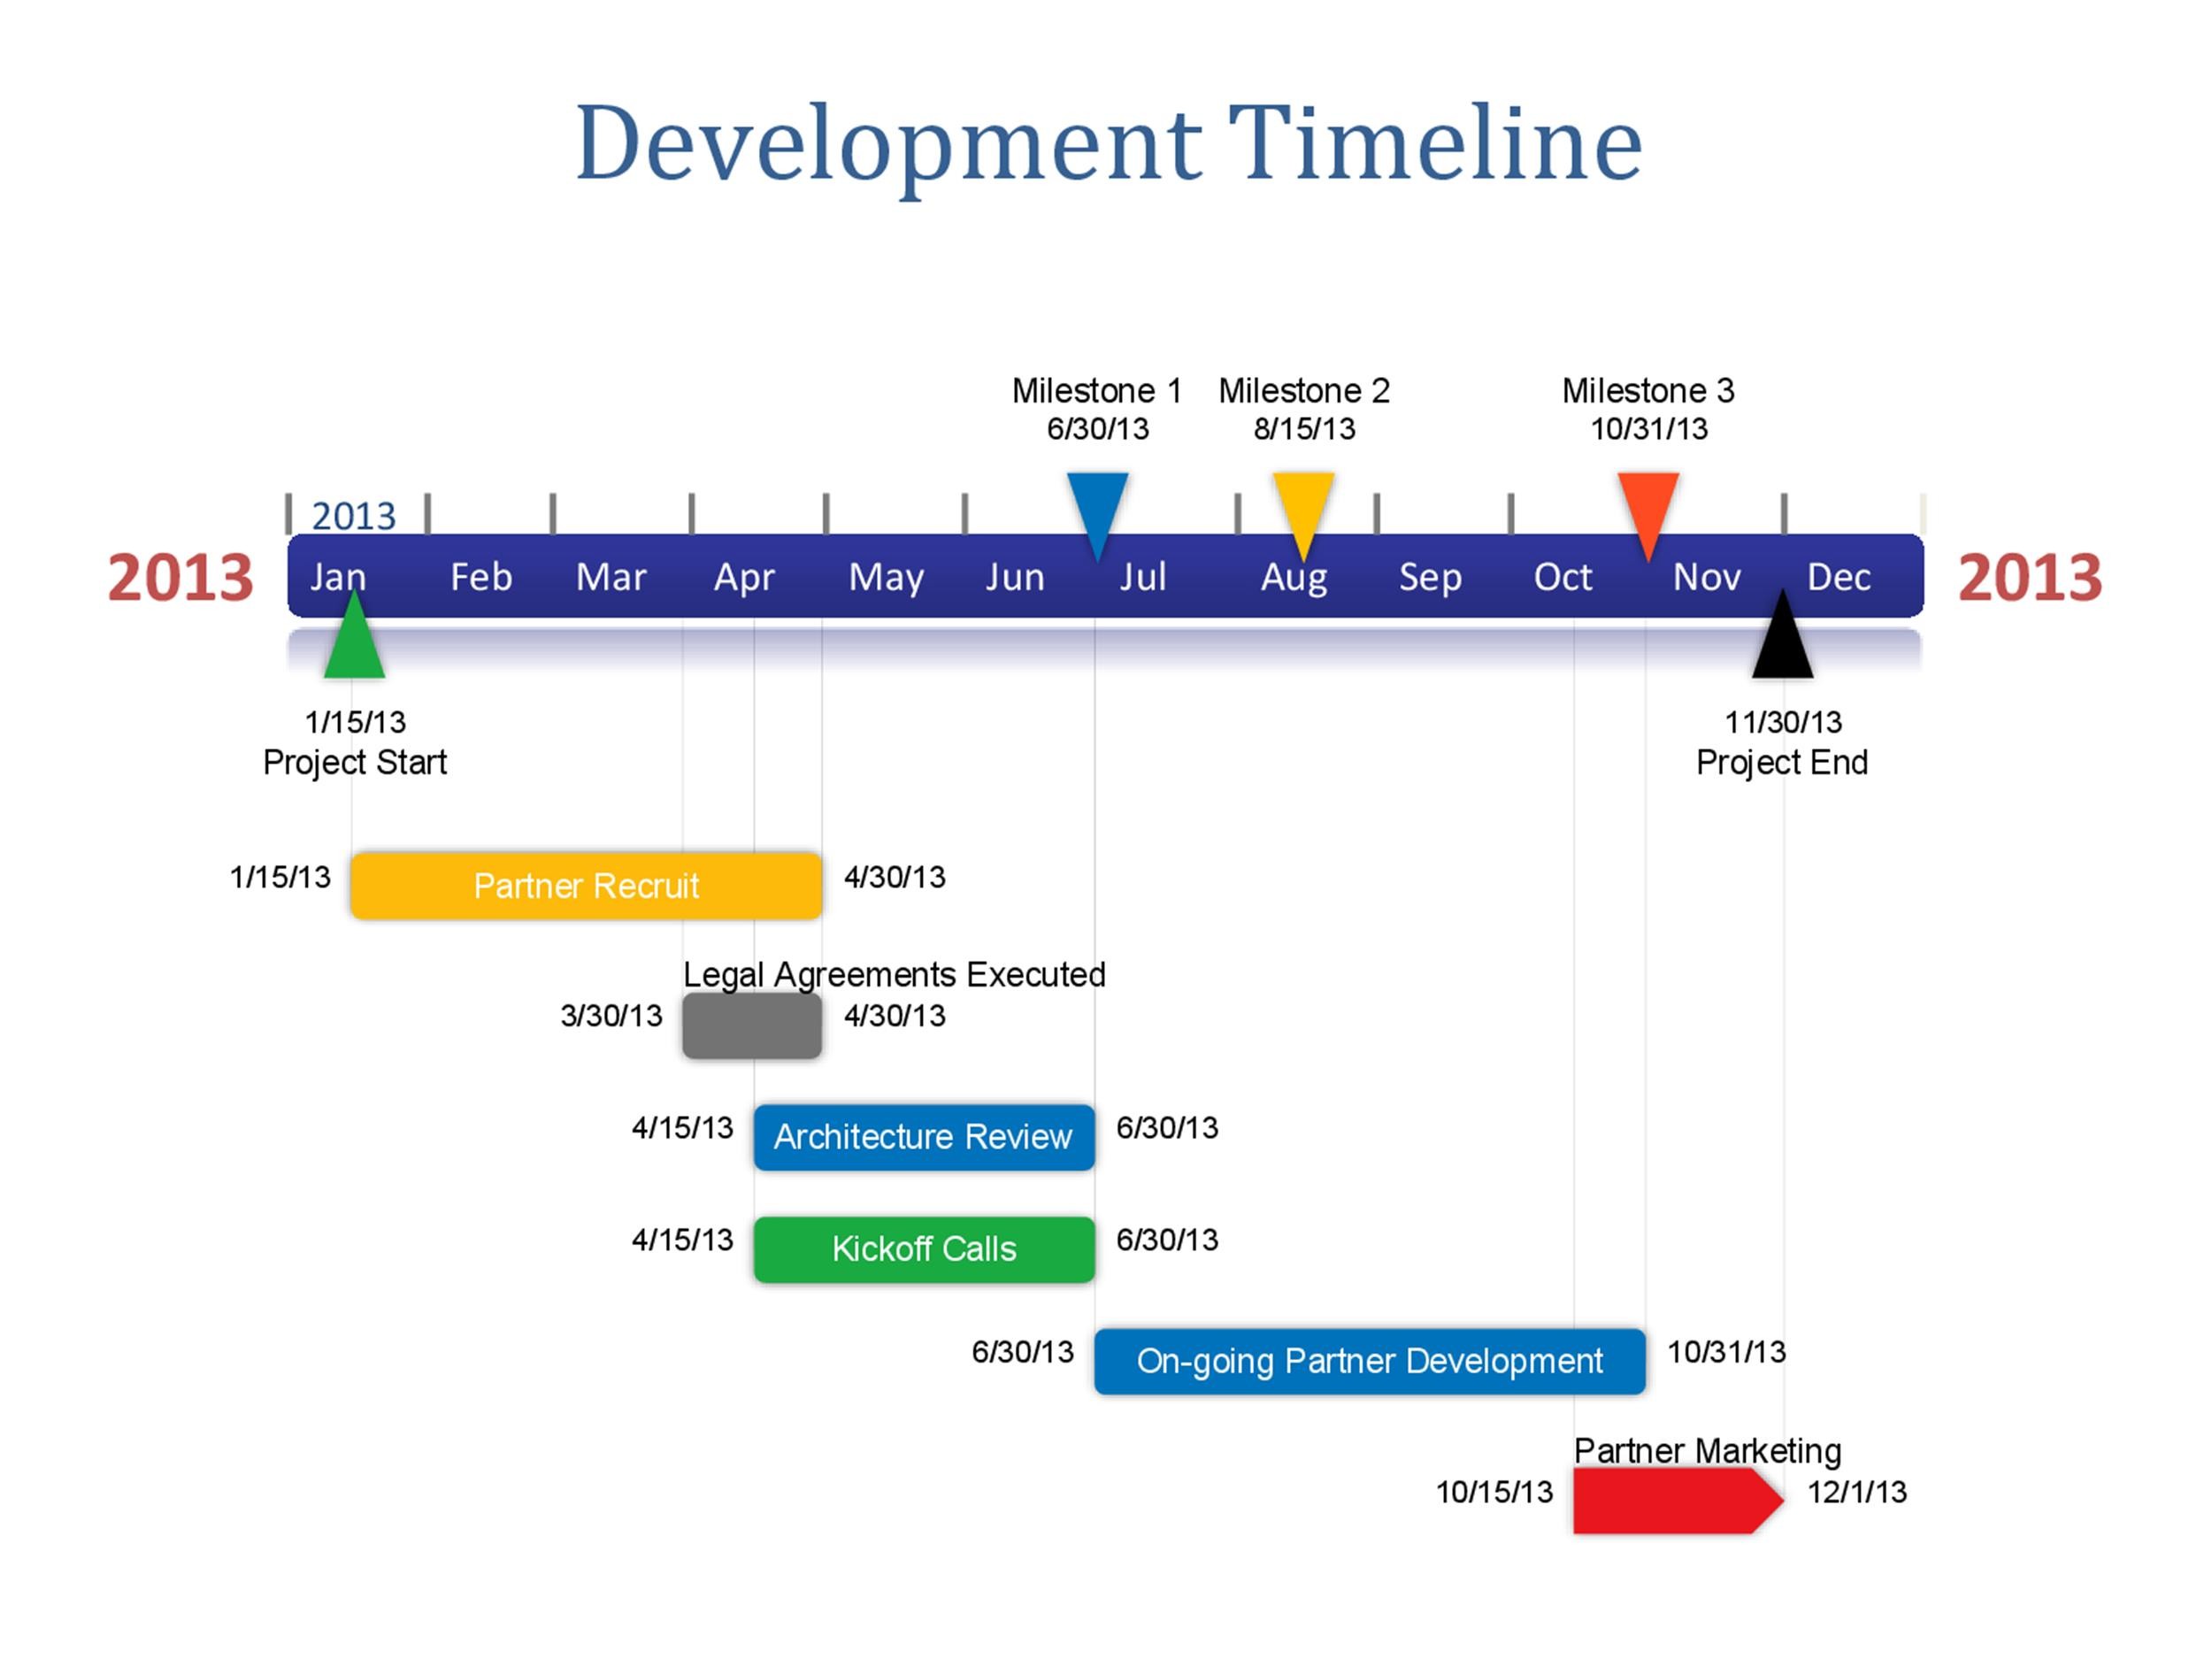 30+ Timeline Templates (Excel, Power Point, Word) Template Lab